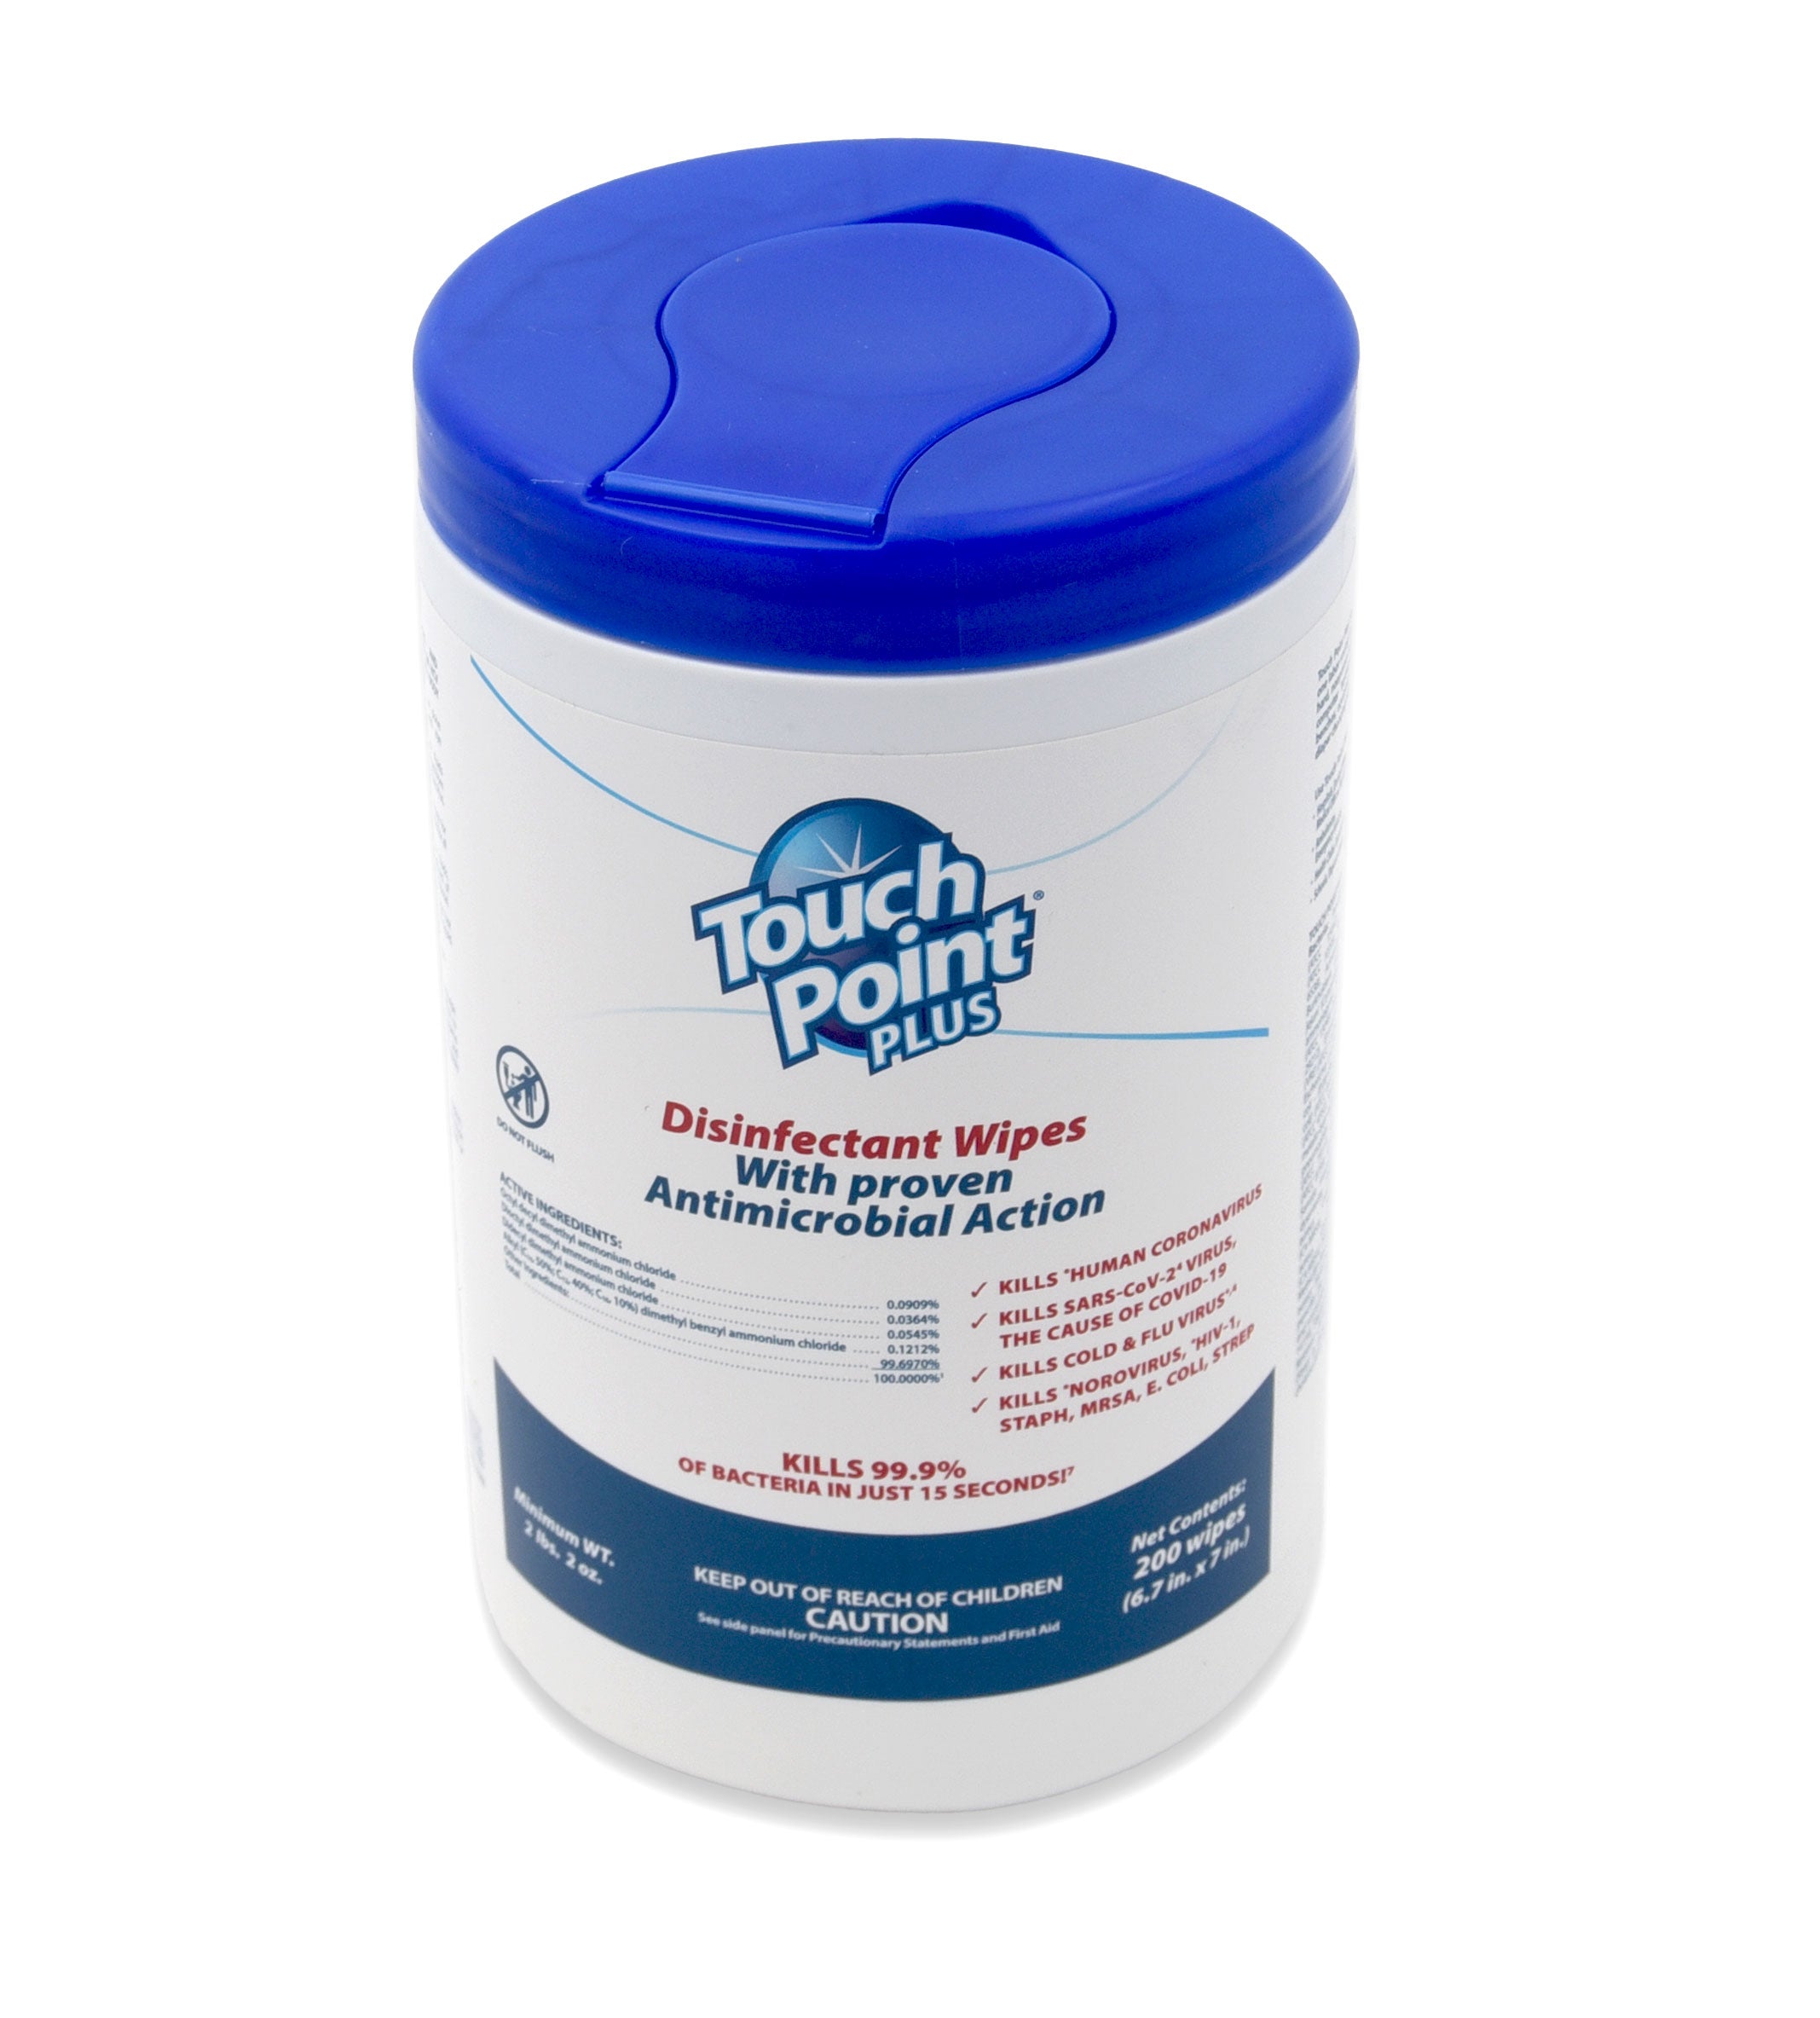 TouchPoint Plus Disinfectant Wipes